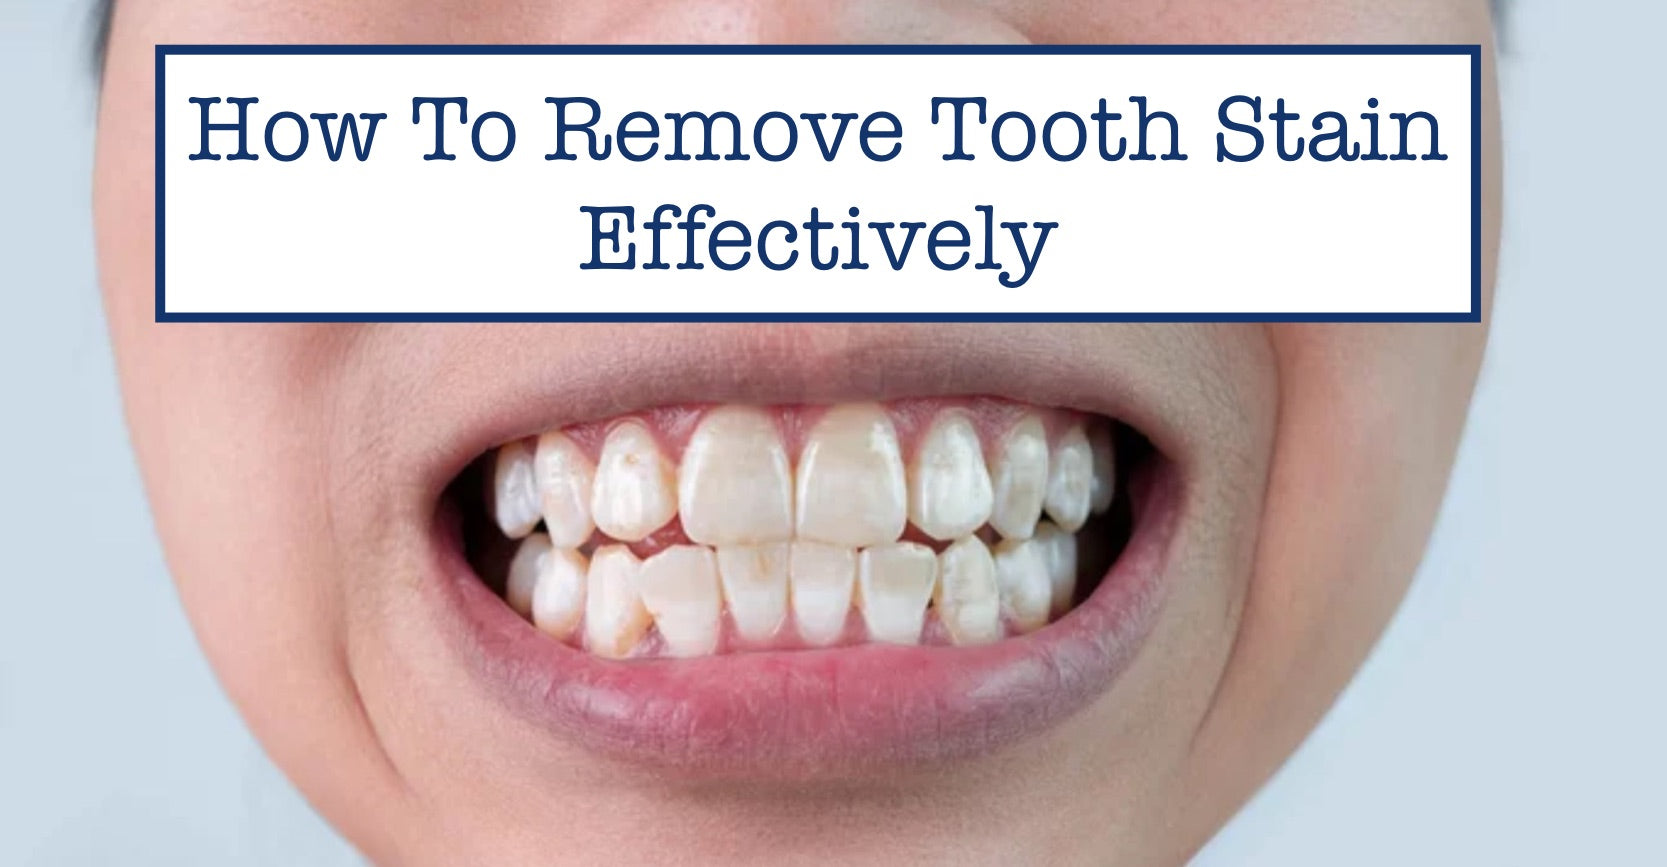 How To Remove Tooth Stain Effectively